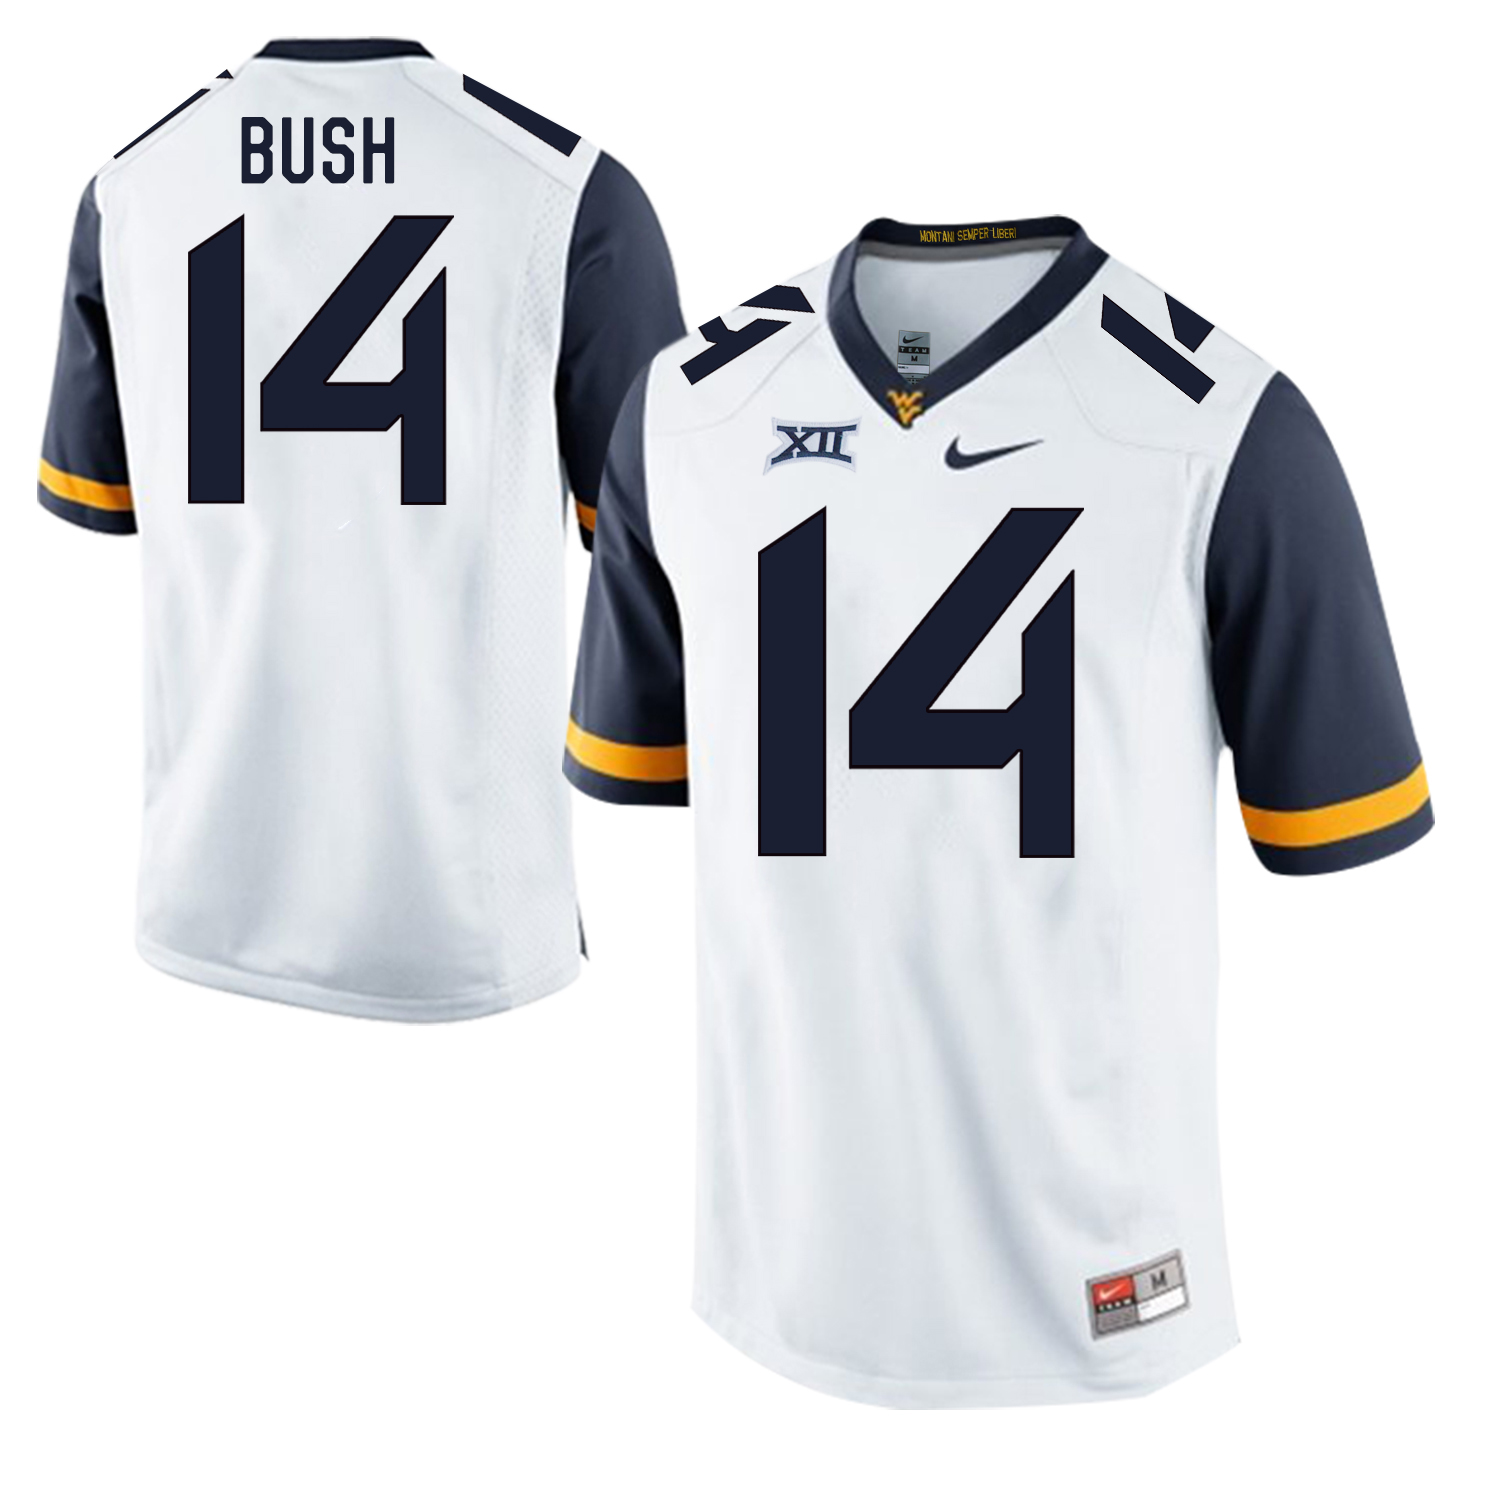 West Virginia Mountaineers 14 Tevin Bush White College Football Jersey